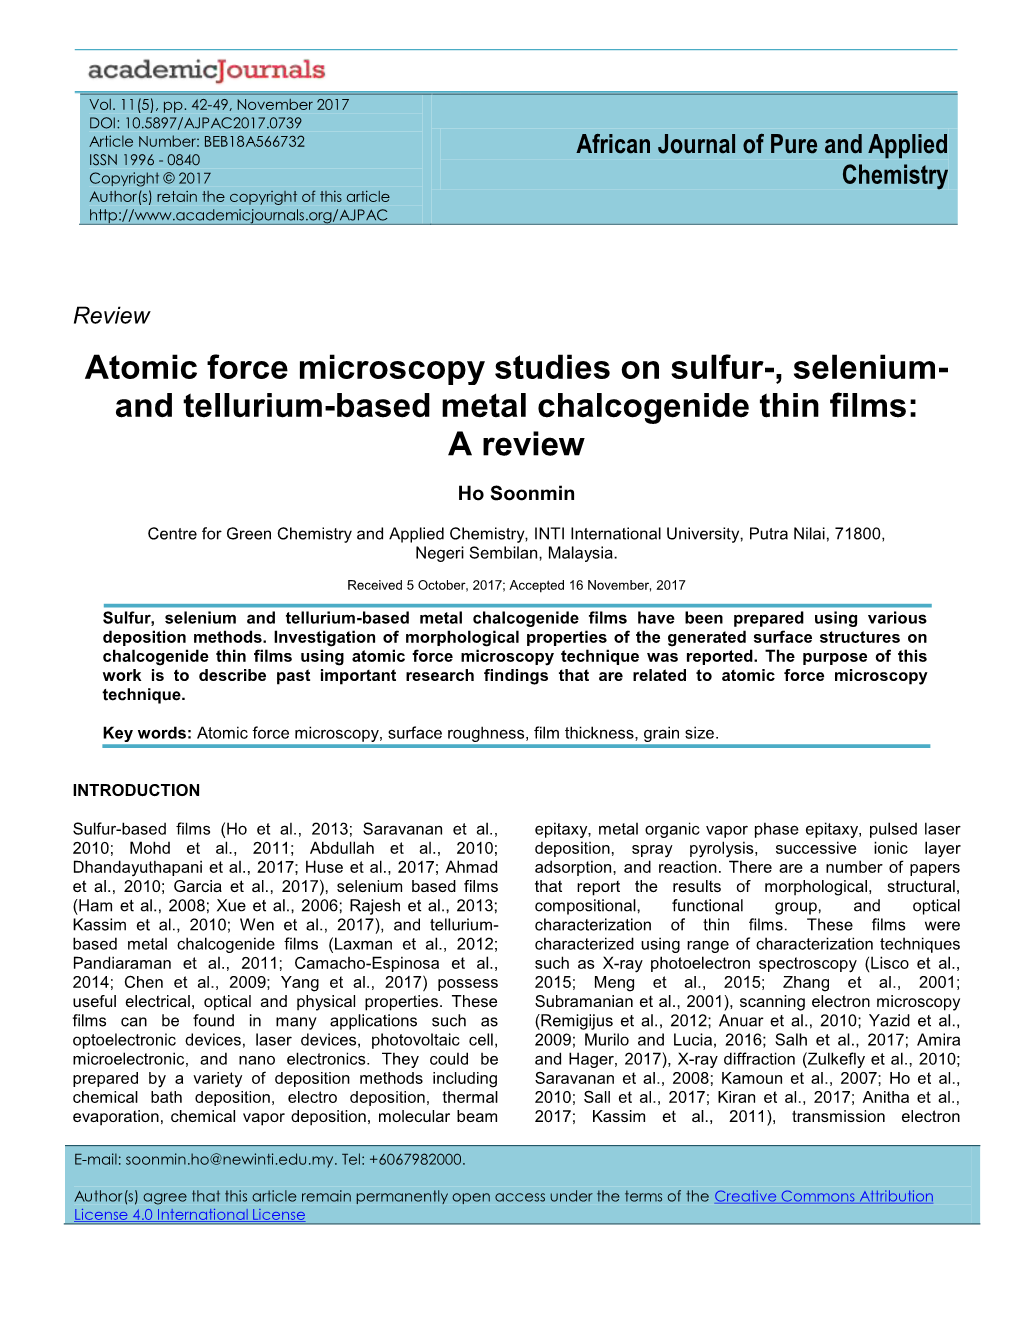 Atomic Force Microscopy Studies on Sulfur-, Selenium- and Tellurium-Based Metal Chalcogenide Thin Films: a Review